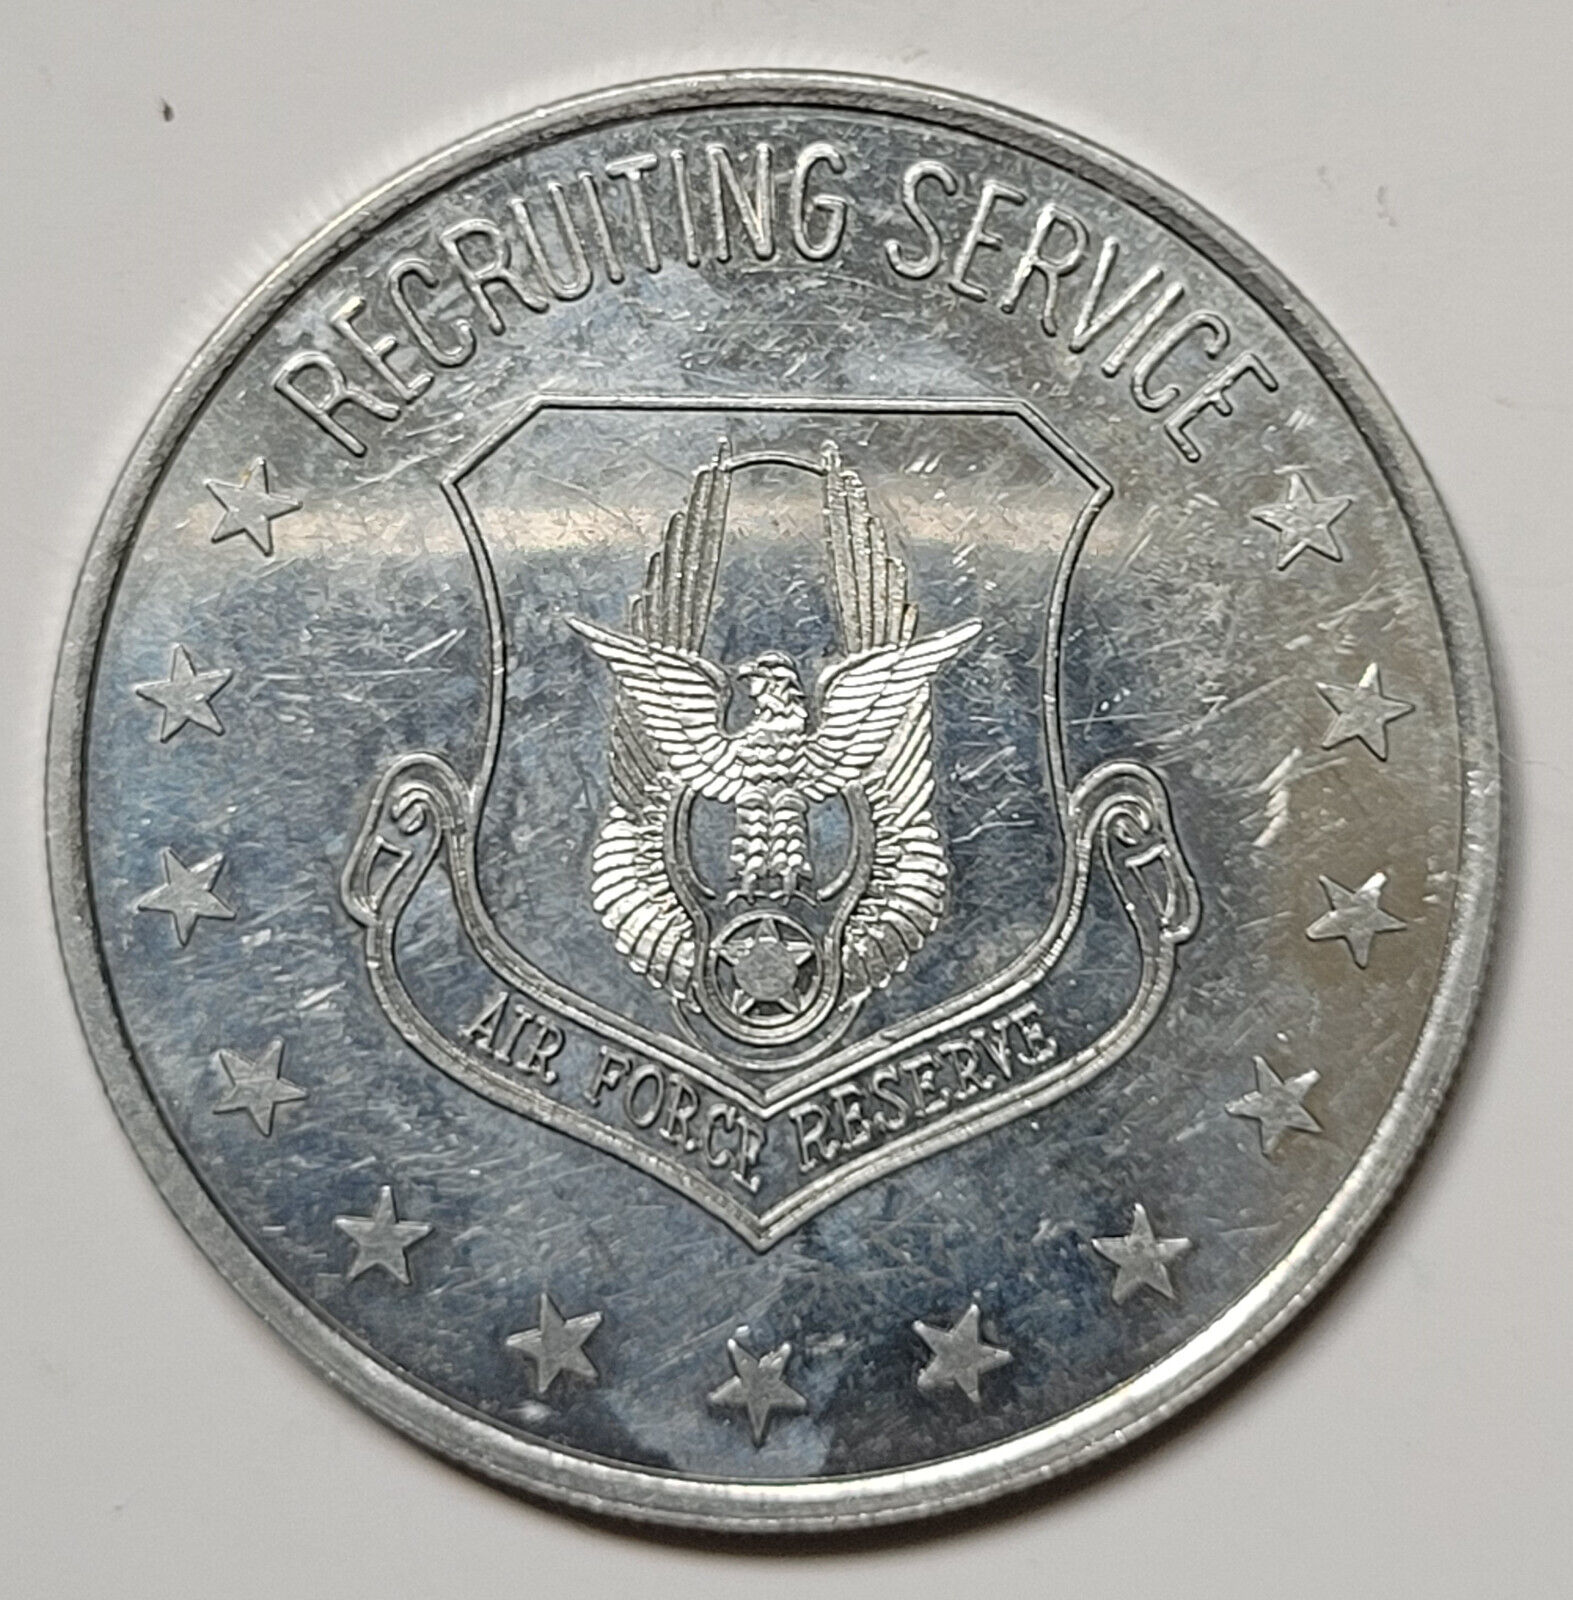 Air Force Reserve Recruiting Service Excellence in the 80s Plastic Token Coin